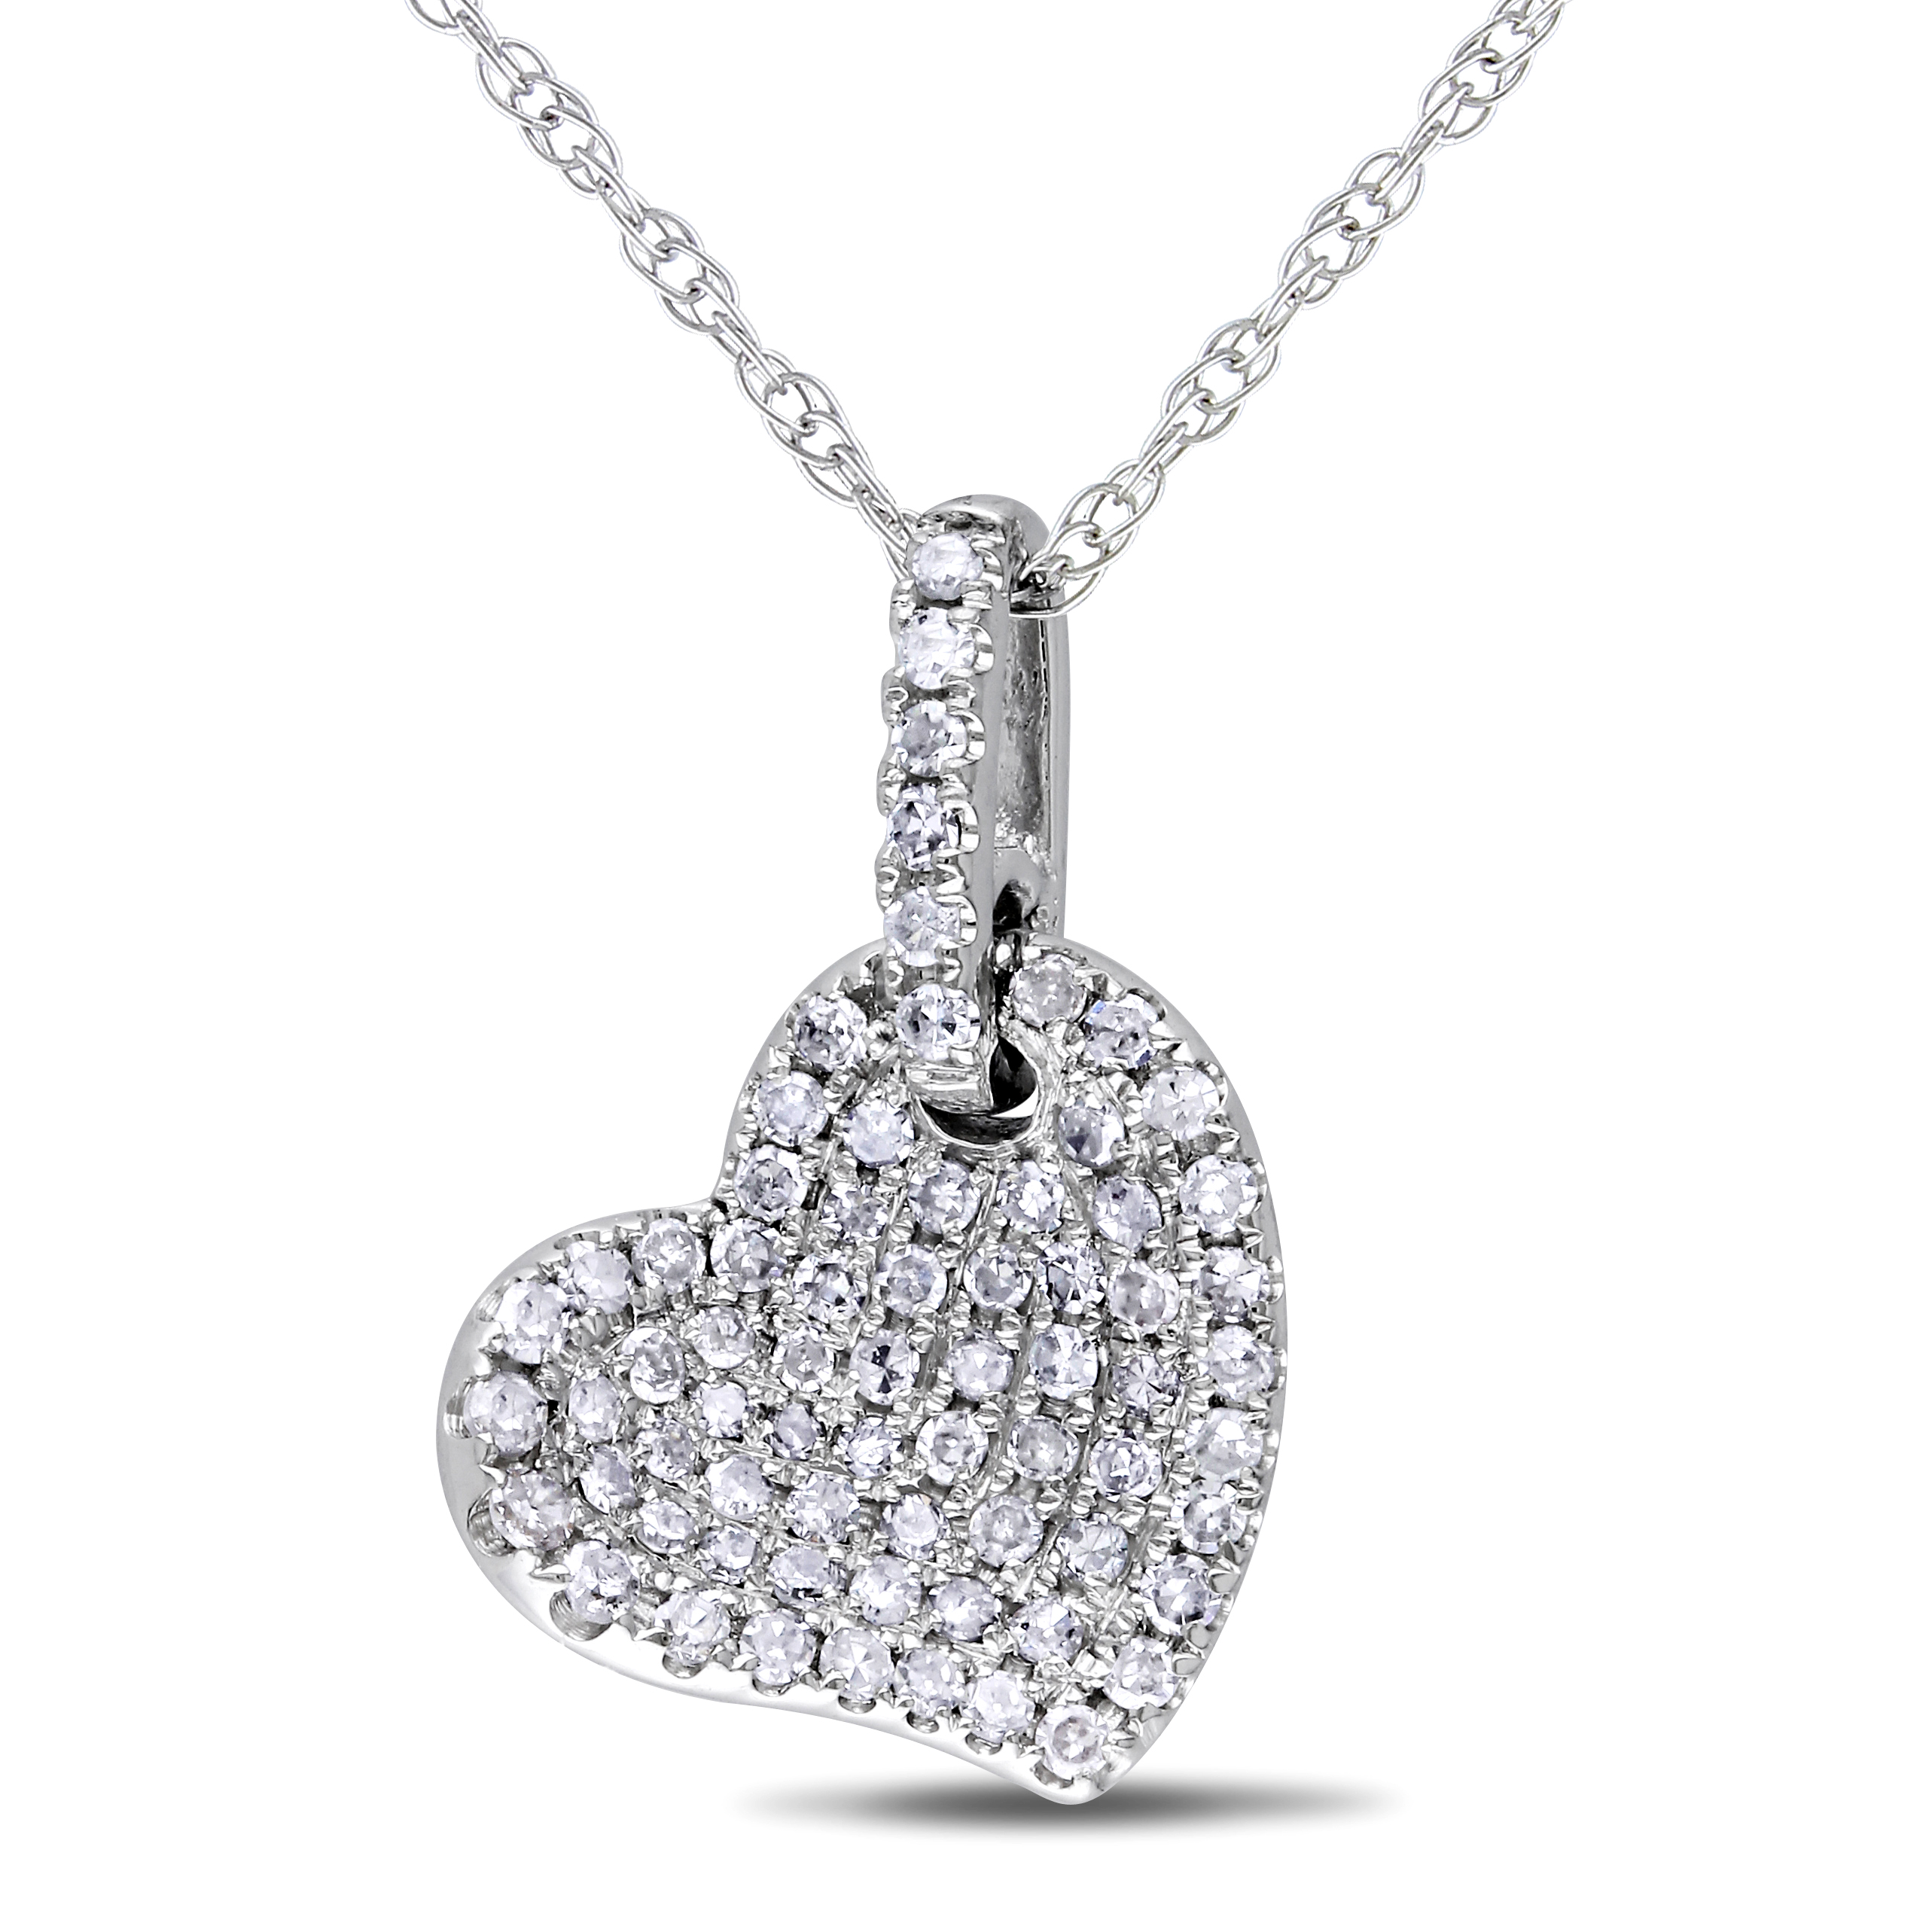 1/4 CT TW Diamond Pave Heart Pendant with Chain in 10k White Gold